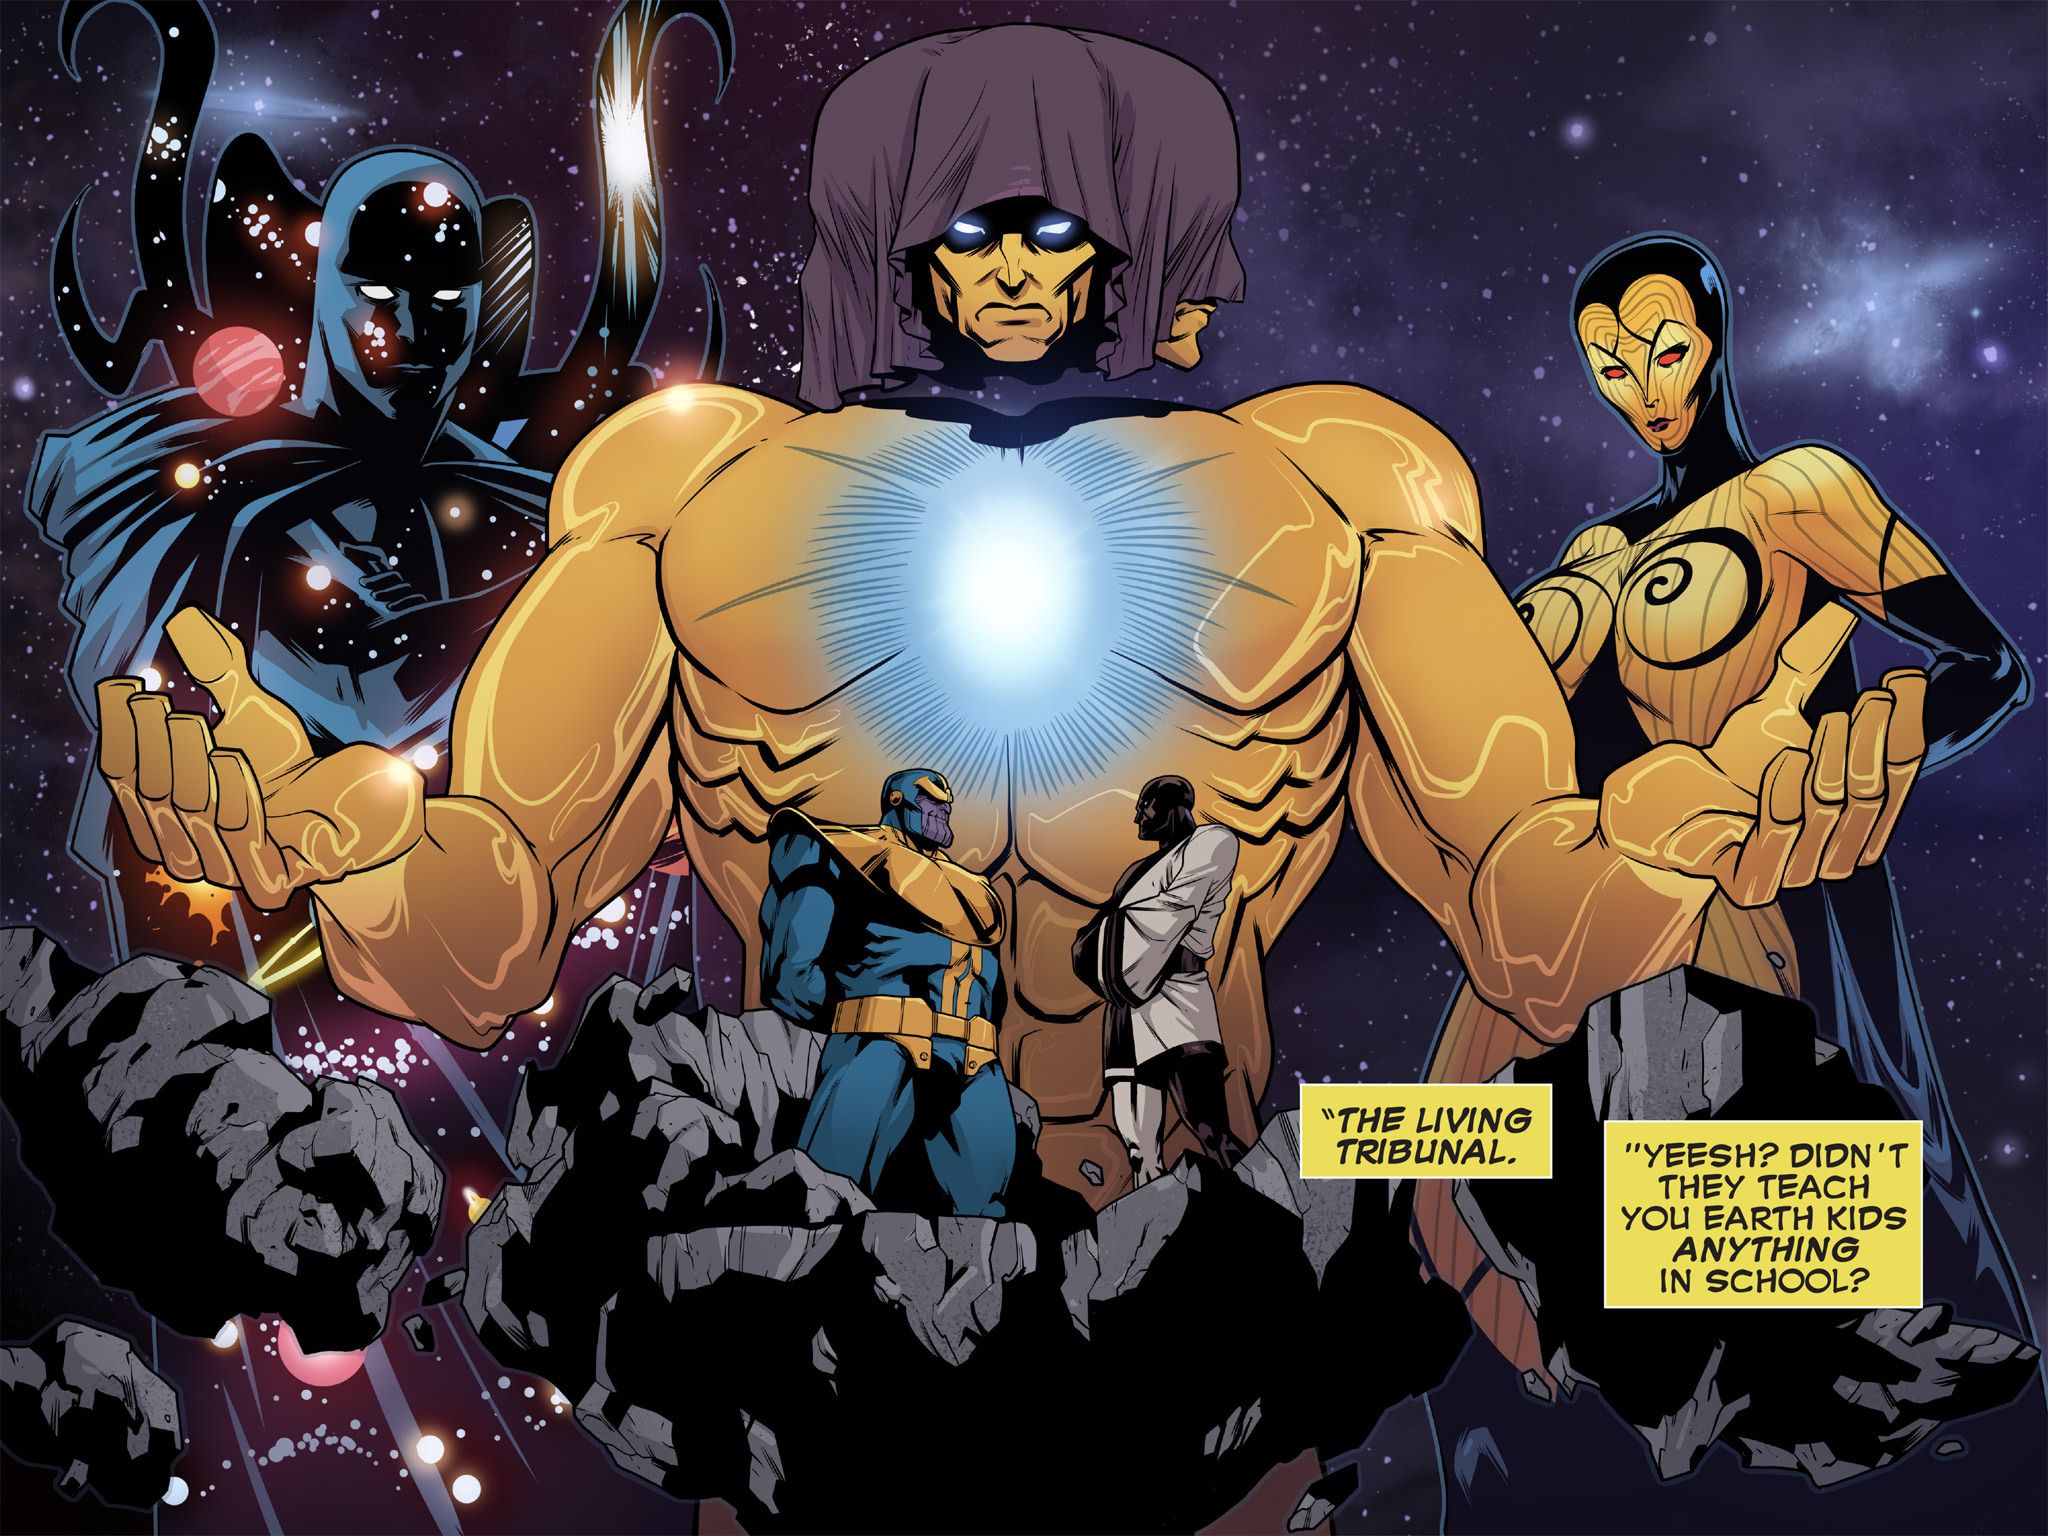 Living Tribunal screenshots, image and picture